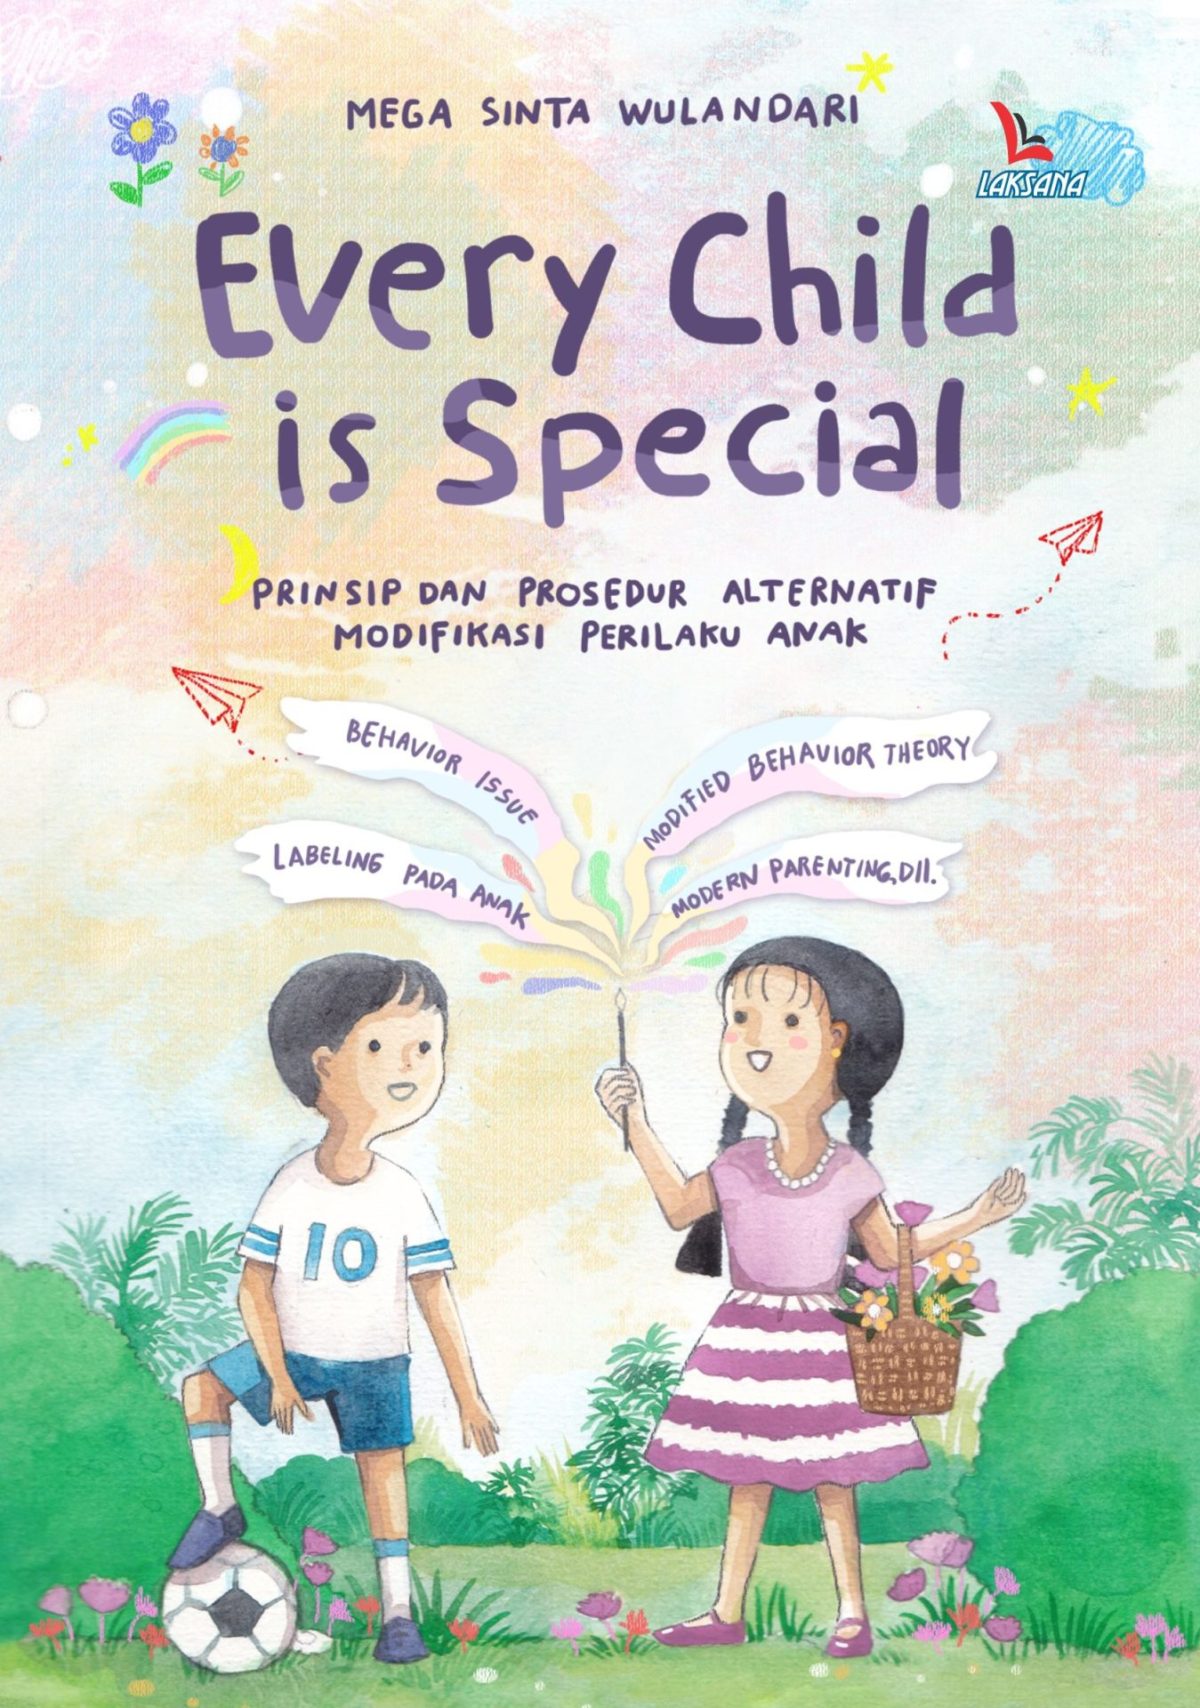 EVERY CHILD IS SPECIAL